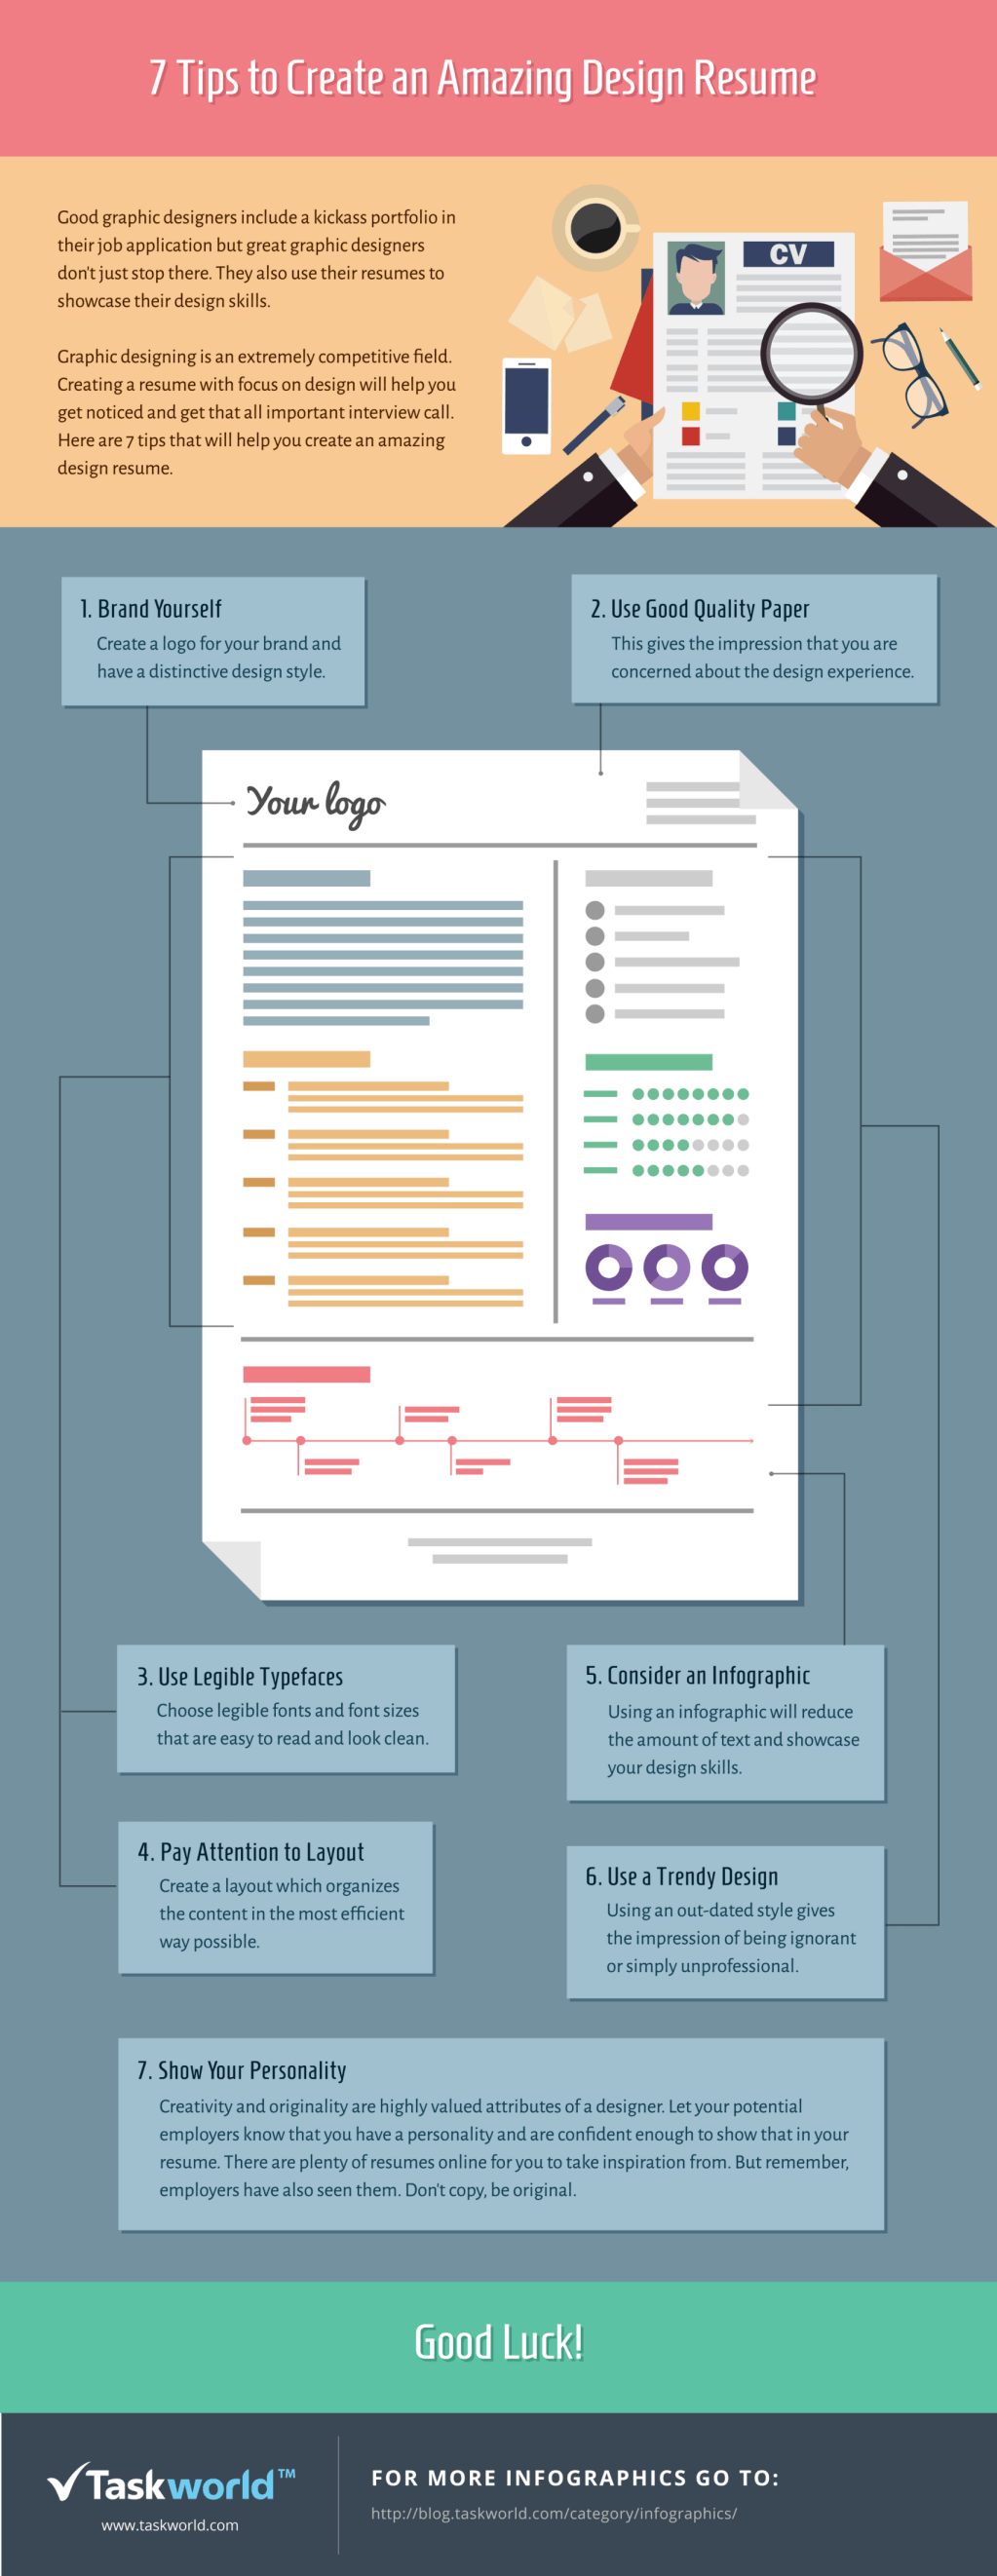 7 Tips to Create an Amazing Design Resume Infographic